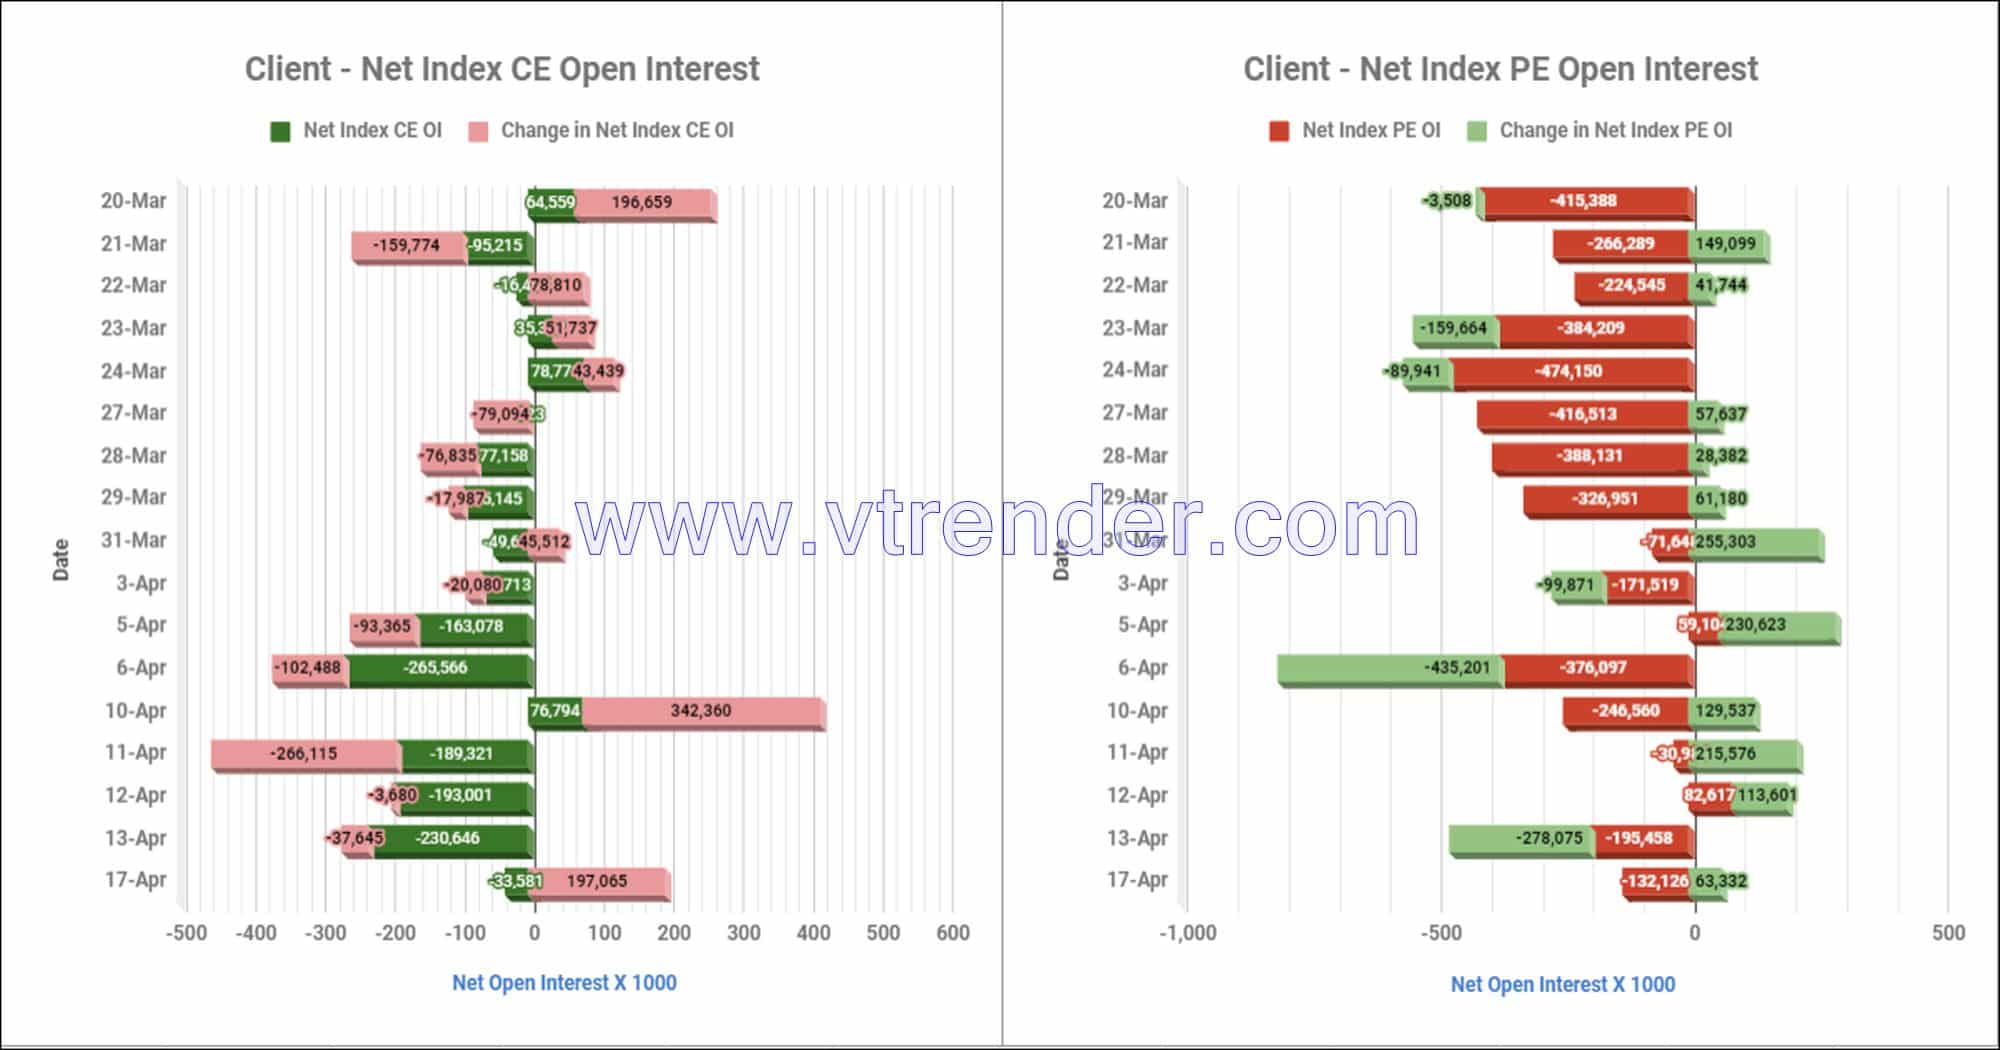 Clientinop17Apr Participantwise Net Open Interest And Net Equity Investments – 17Th Apr 2023 Client, Equity, Fii, Index Futures, Index Options, Open Interest, Prop